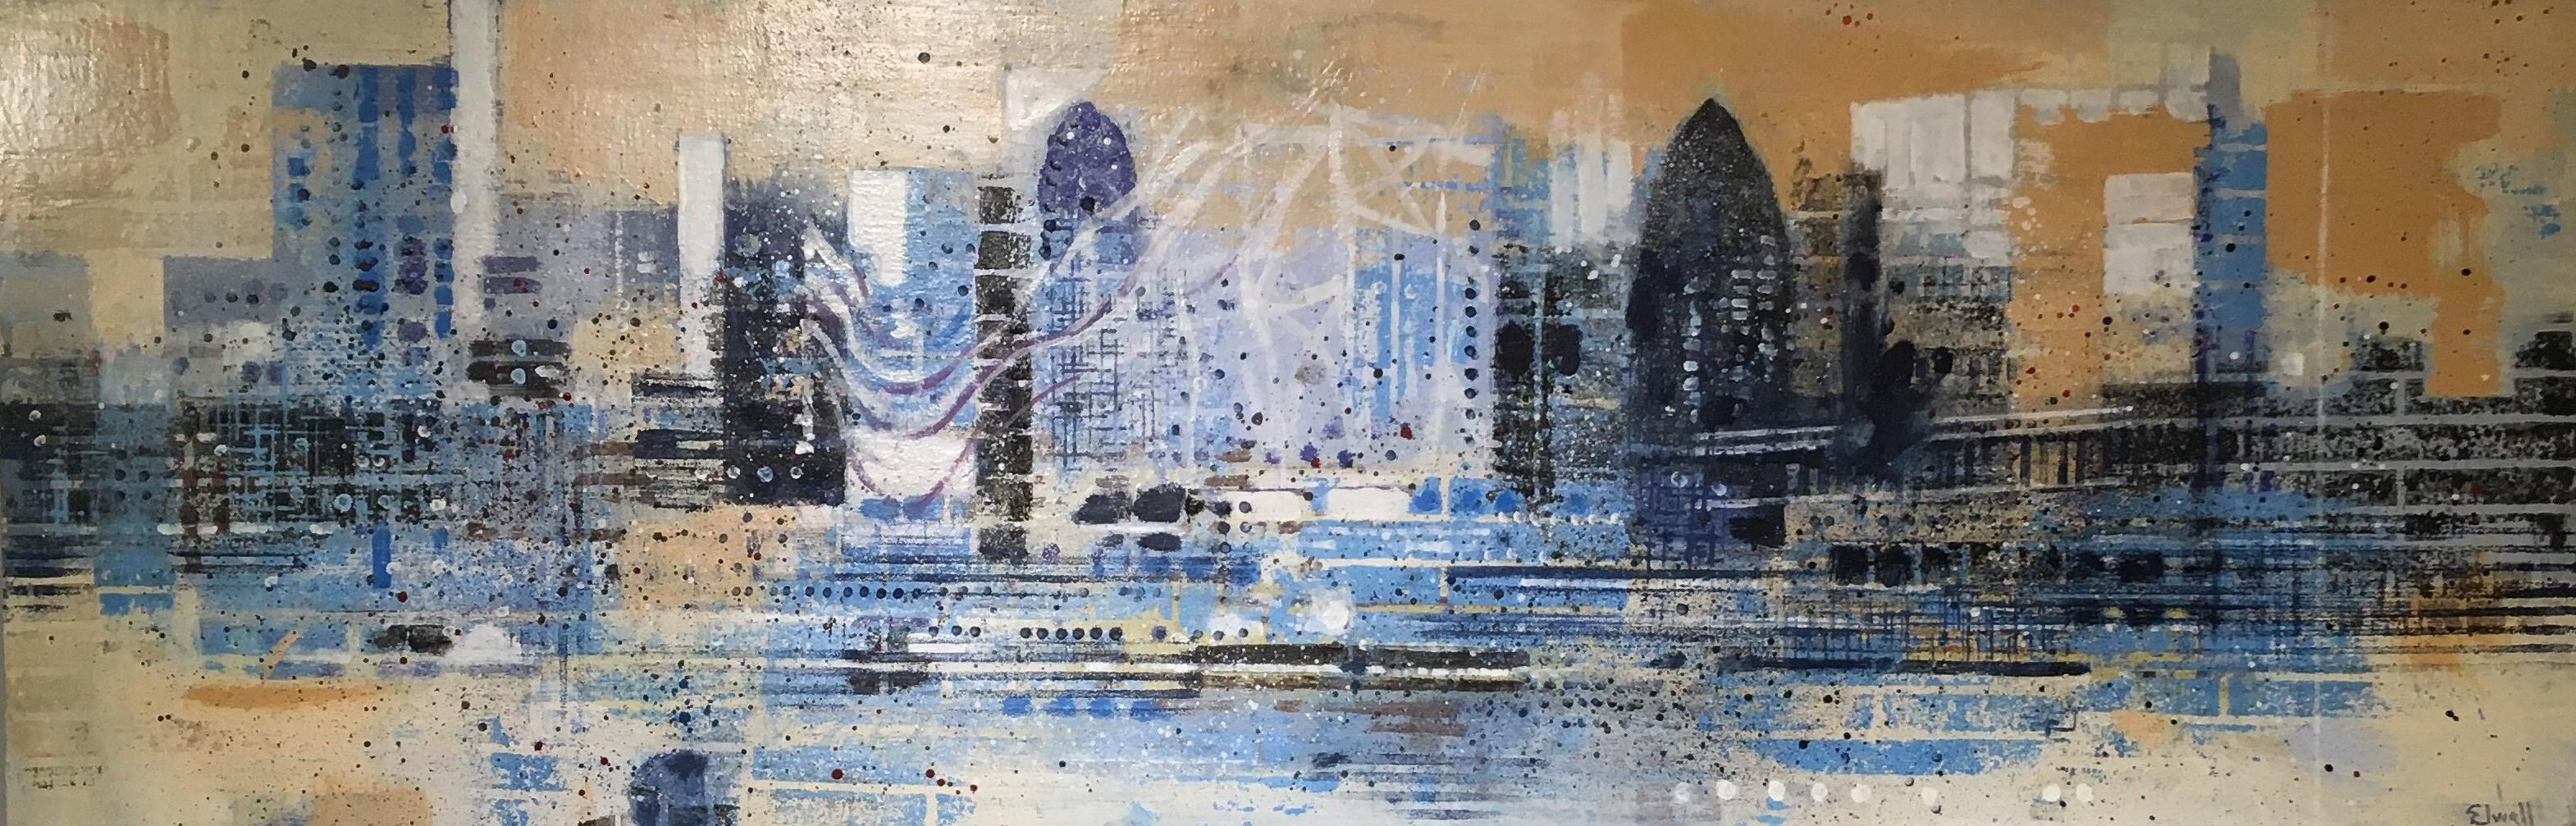 Brian Elwell Figurative Painting - Blue Thames - panoramatic landscape cityscape London Thames buildings view blue